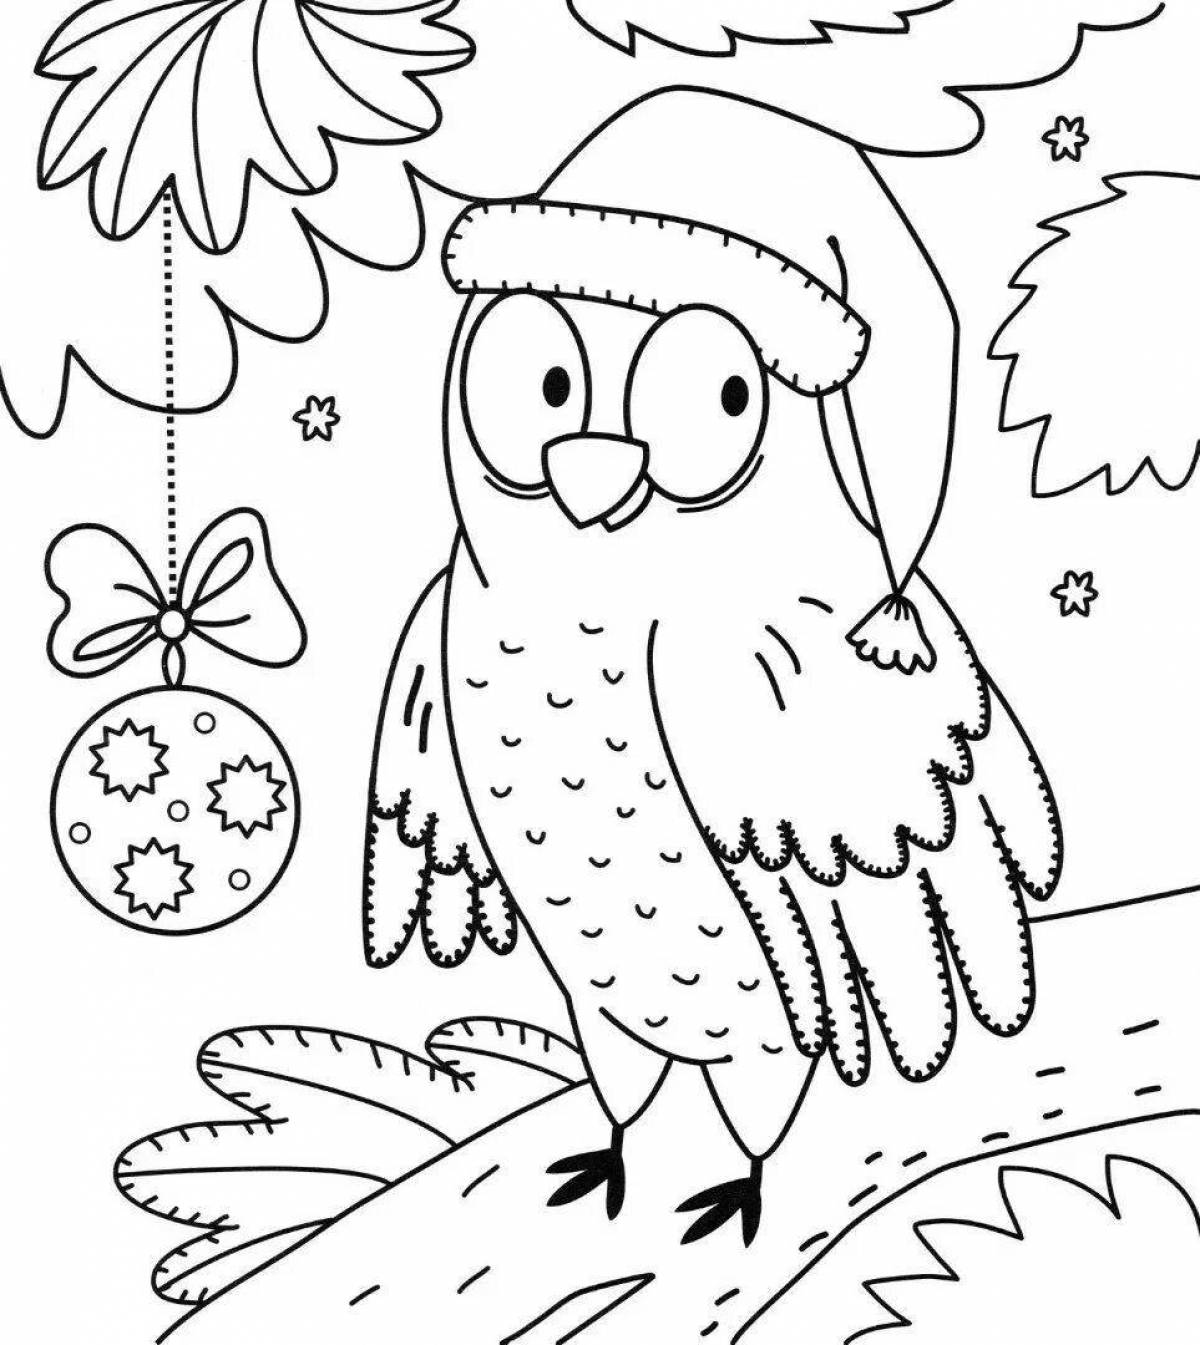 Adorable owl coloring page for 6-7 year olds